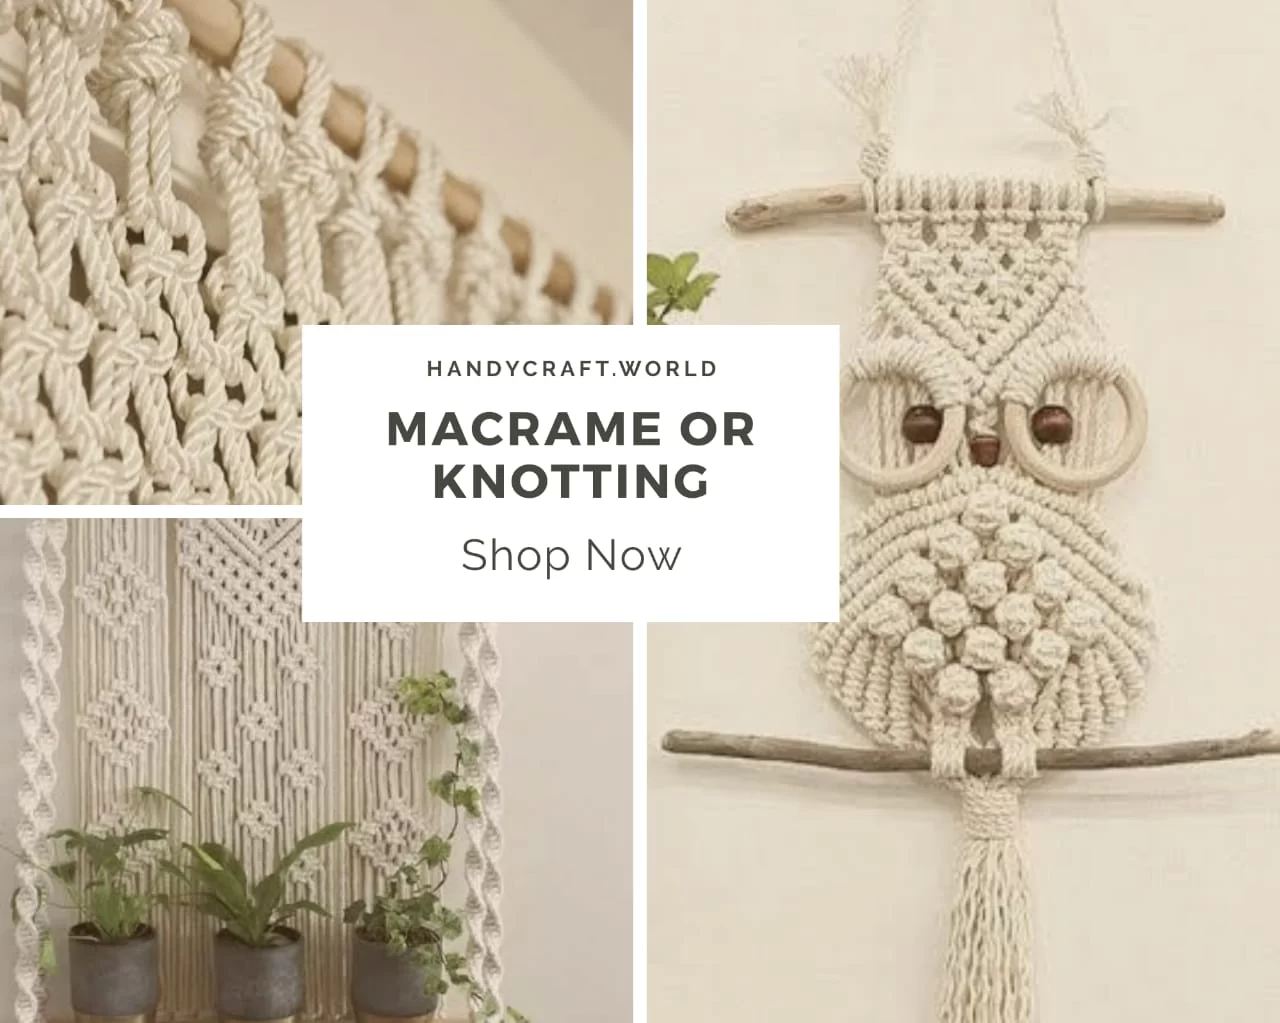 Macrame Art | Wall hangings and plant hangers